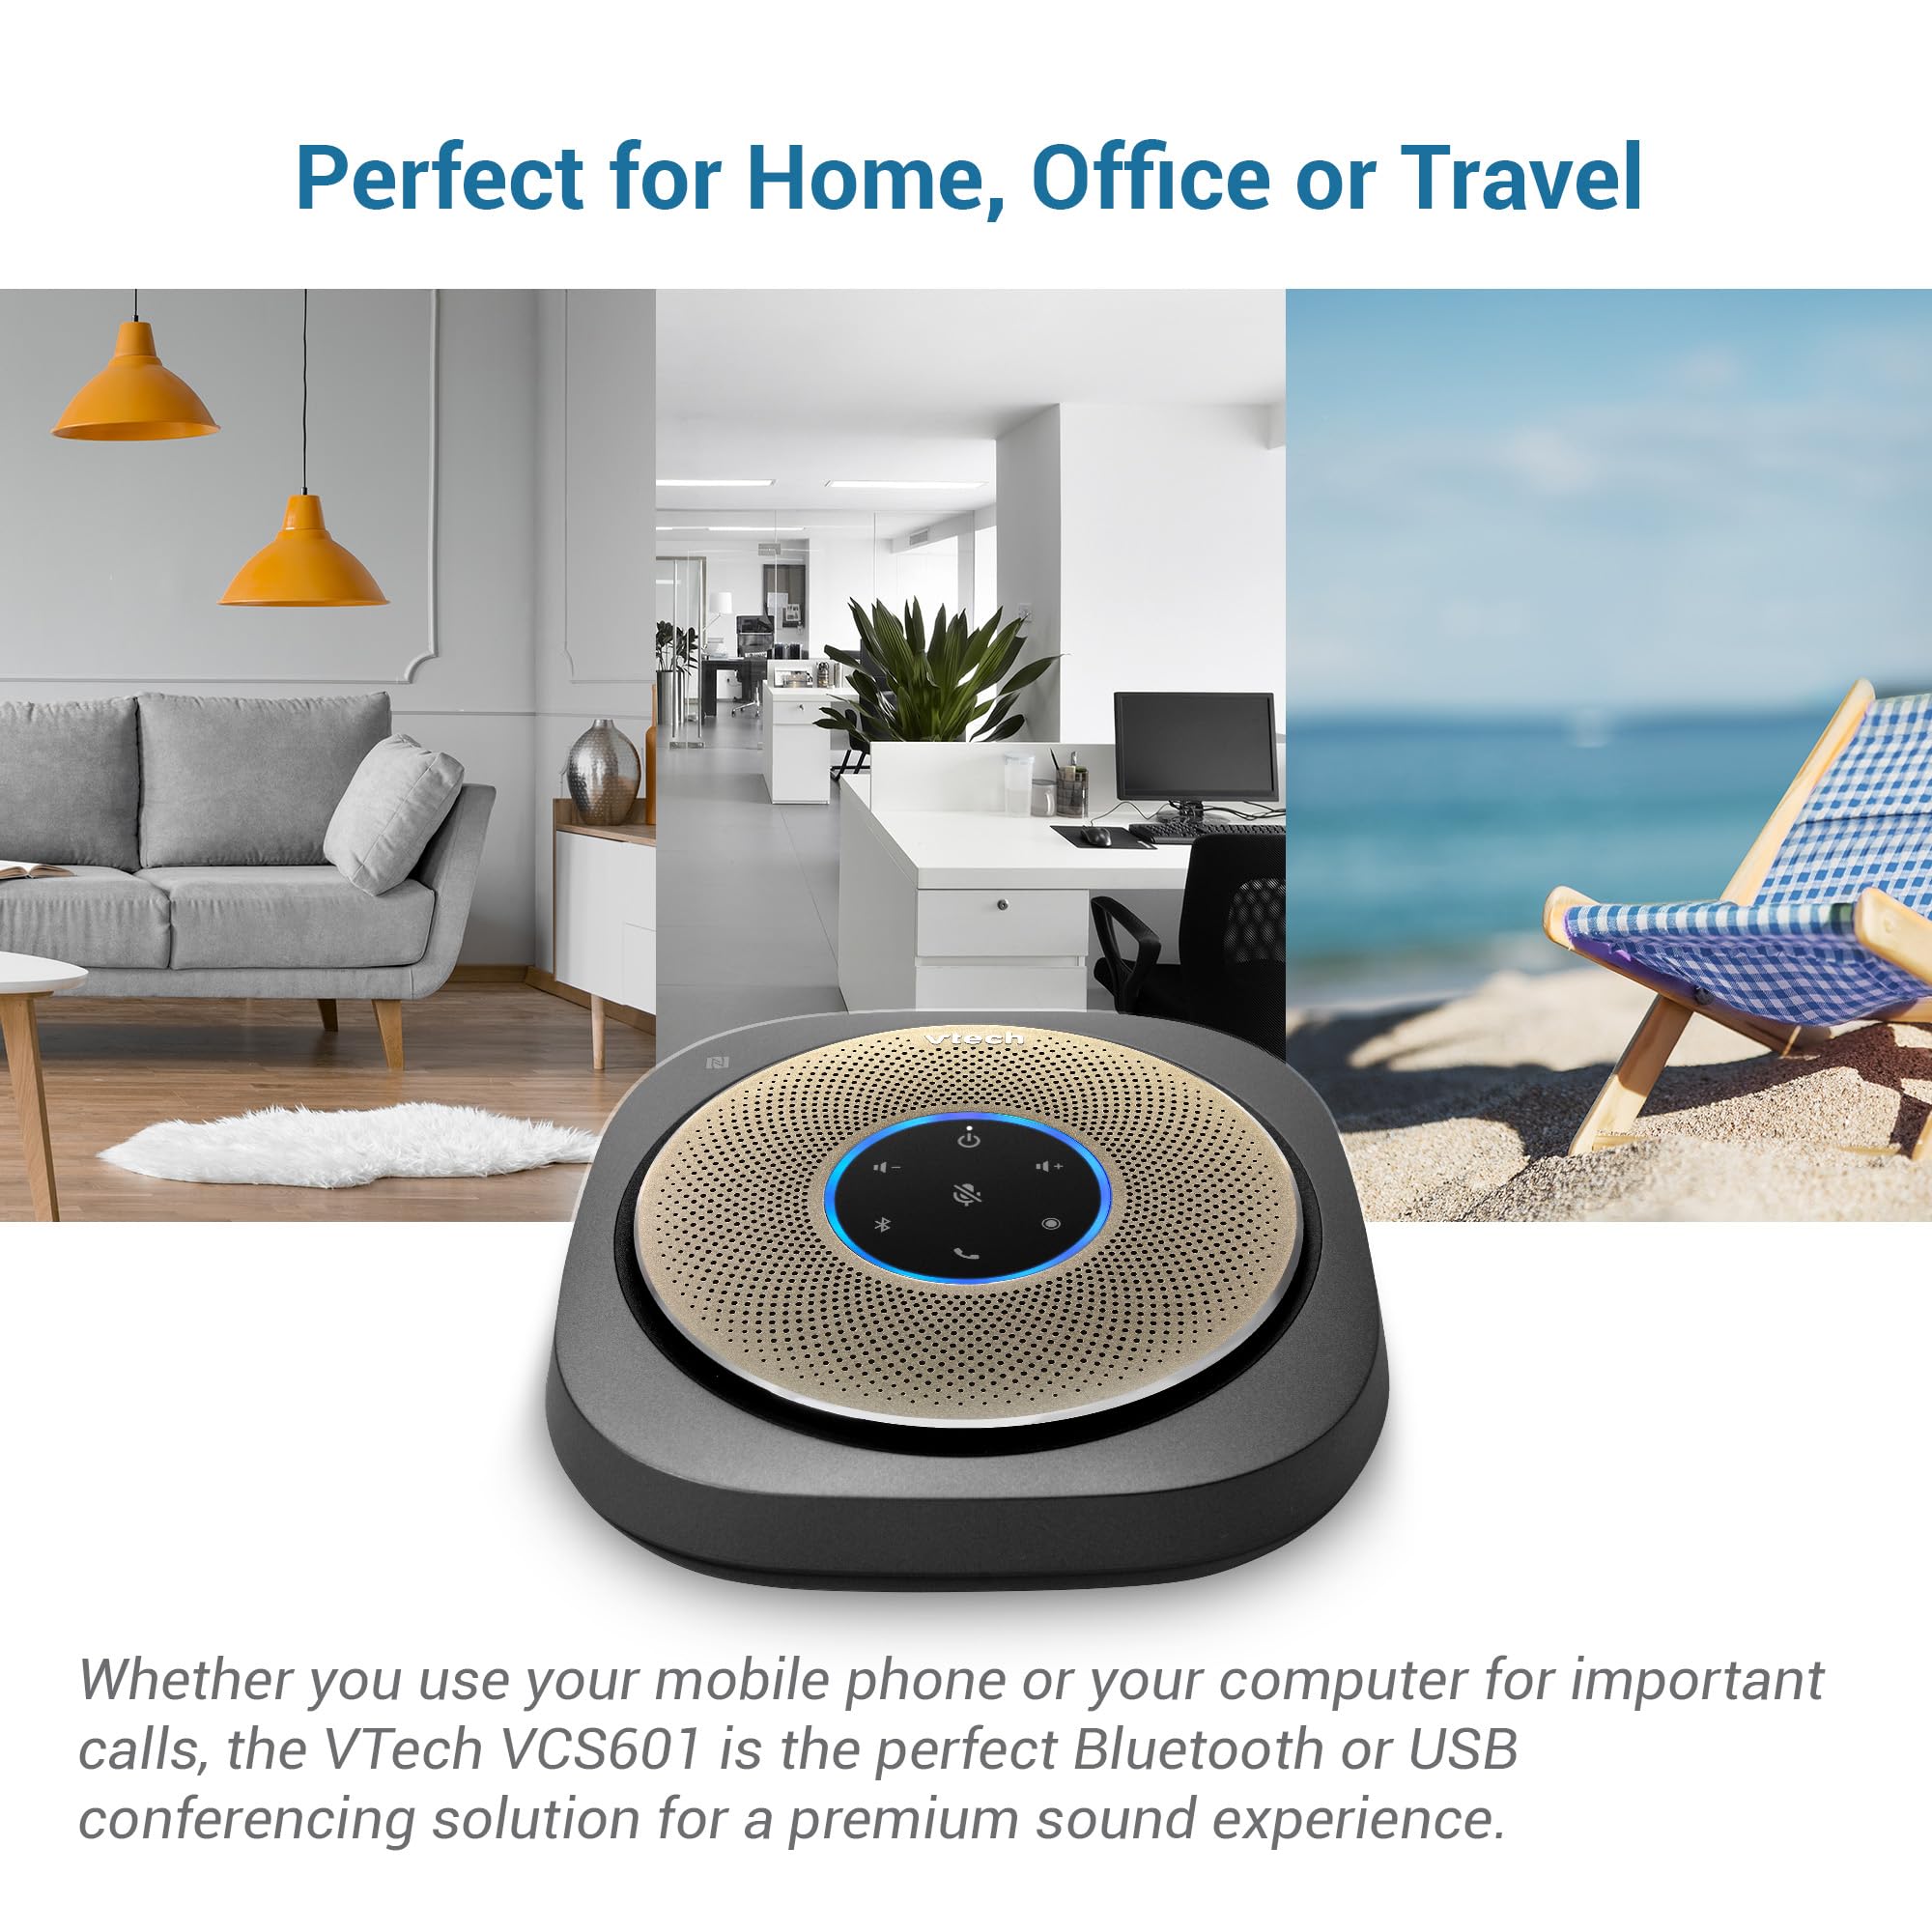 VTech VCS601-2 Bluetooth 5.0 Conference Speakerphone, 6 Mics, Smart NFC Connect, 24 hr Call Time / 5200mAh Battery with Reverse Charging, USB C, Voice Assistant, Home Office, Small & Medium Business